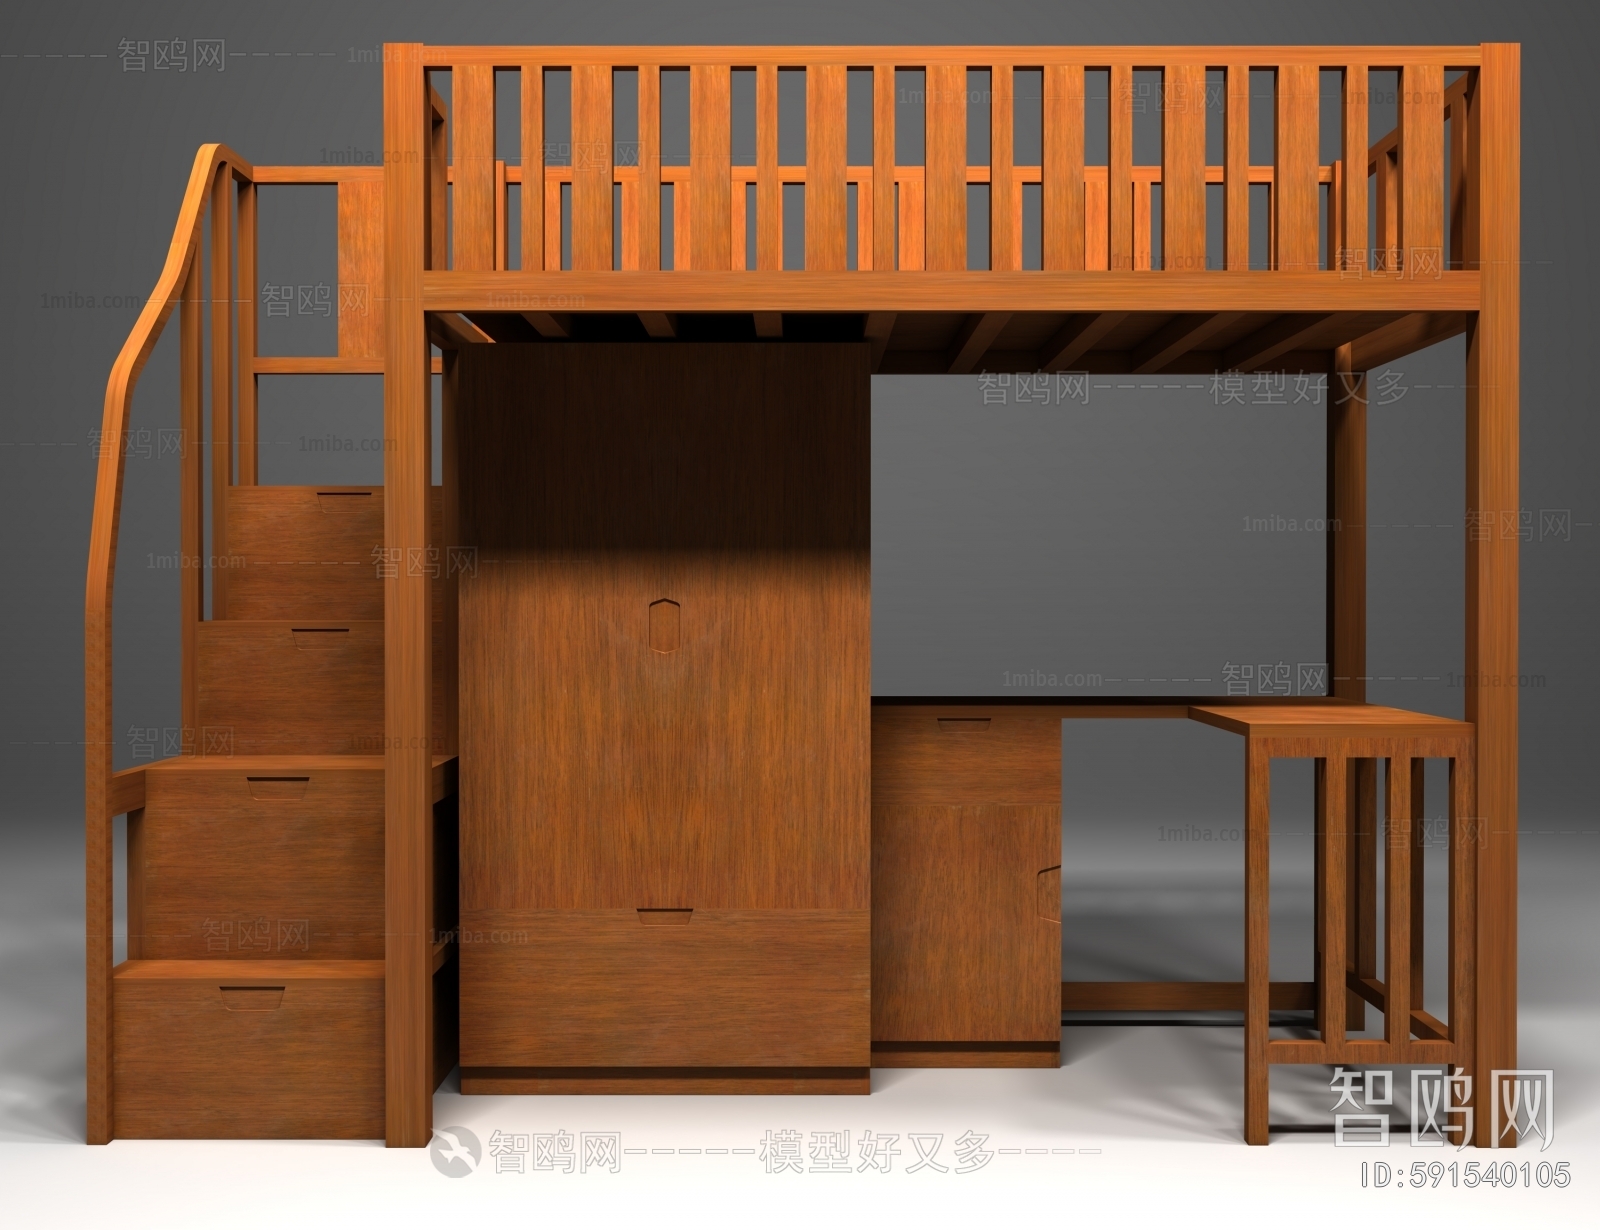 New Chinese Style Bunk Bed